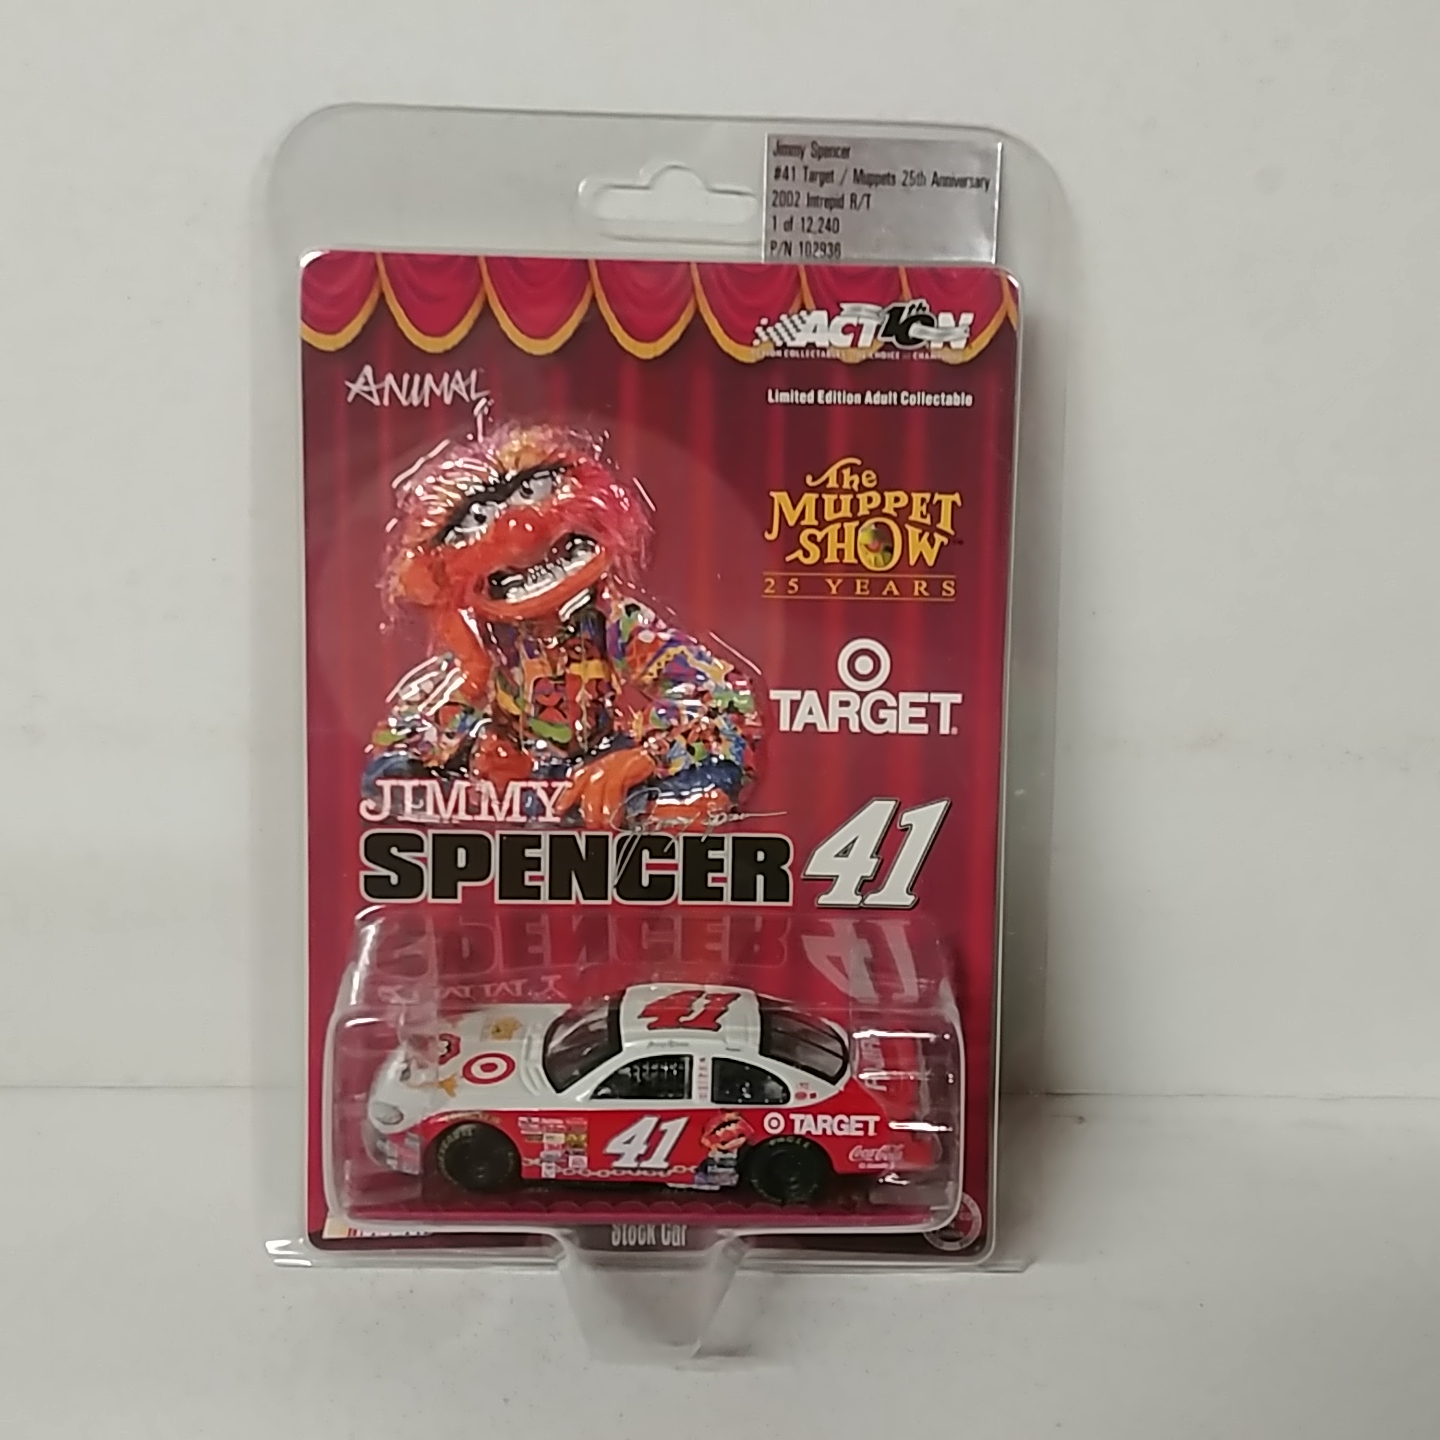 2002 Jimmy Spencer 1/64th Target  "Muppets Animal" car